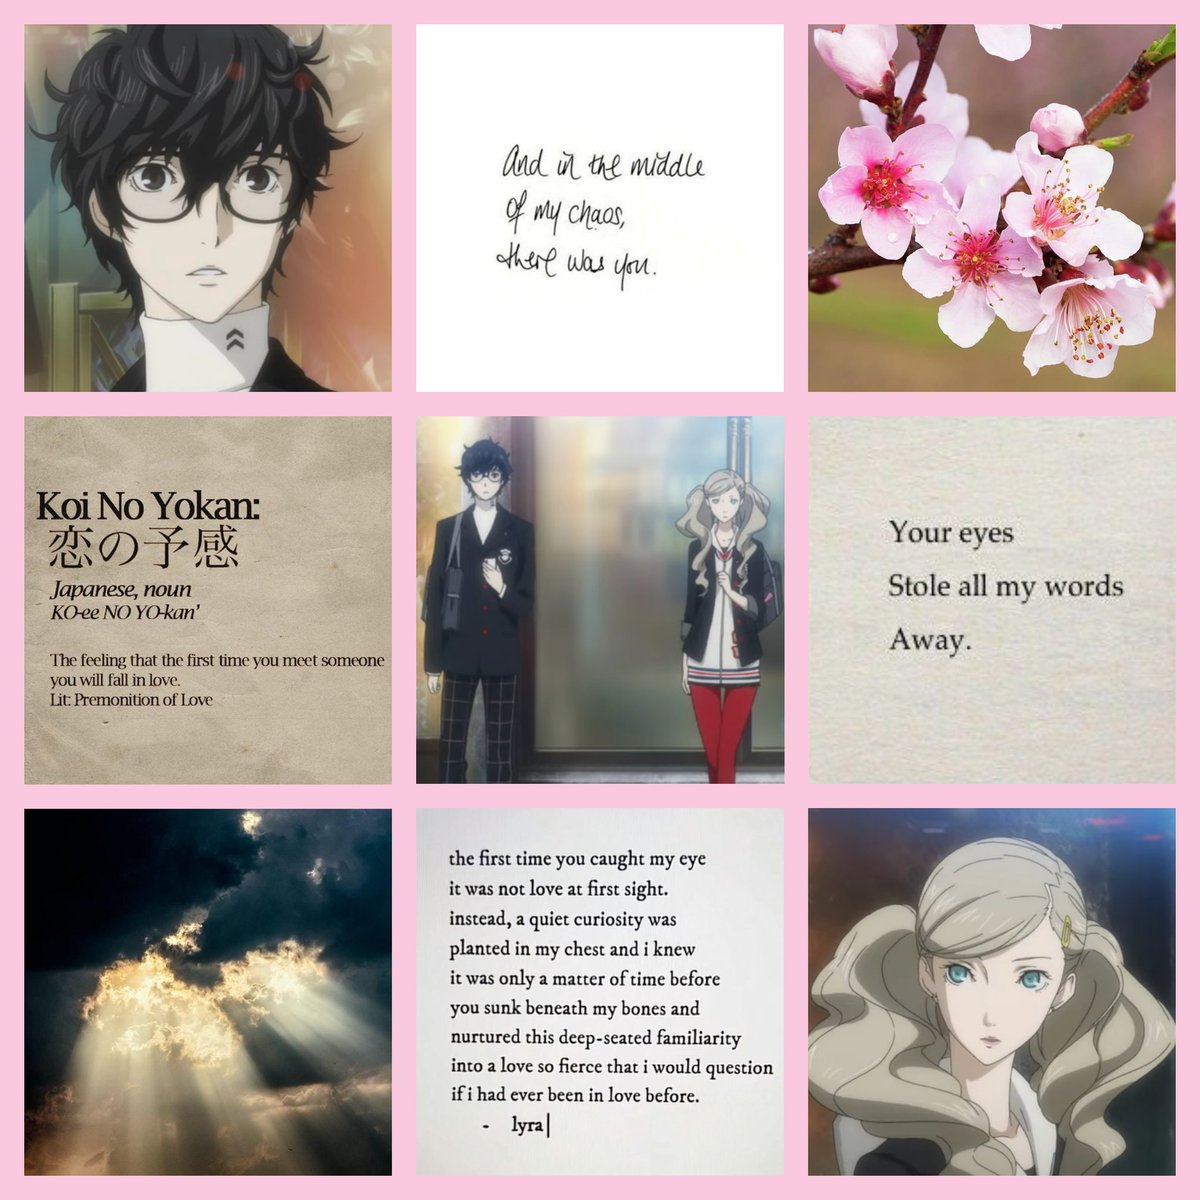 Made this moodboard for #ShuannWeek2k24's Throwback Day for the prompt First Meeting. thought it'd be fitting since 4/11 is the day Shuann first met! ❤️🌸 #Shuann #AnnTakamaki #RenAmamiya #Persona5 #Persona5Royal